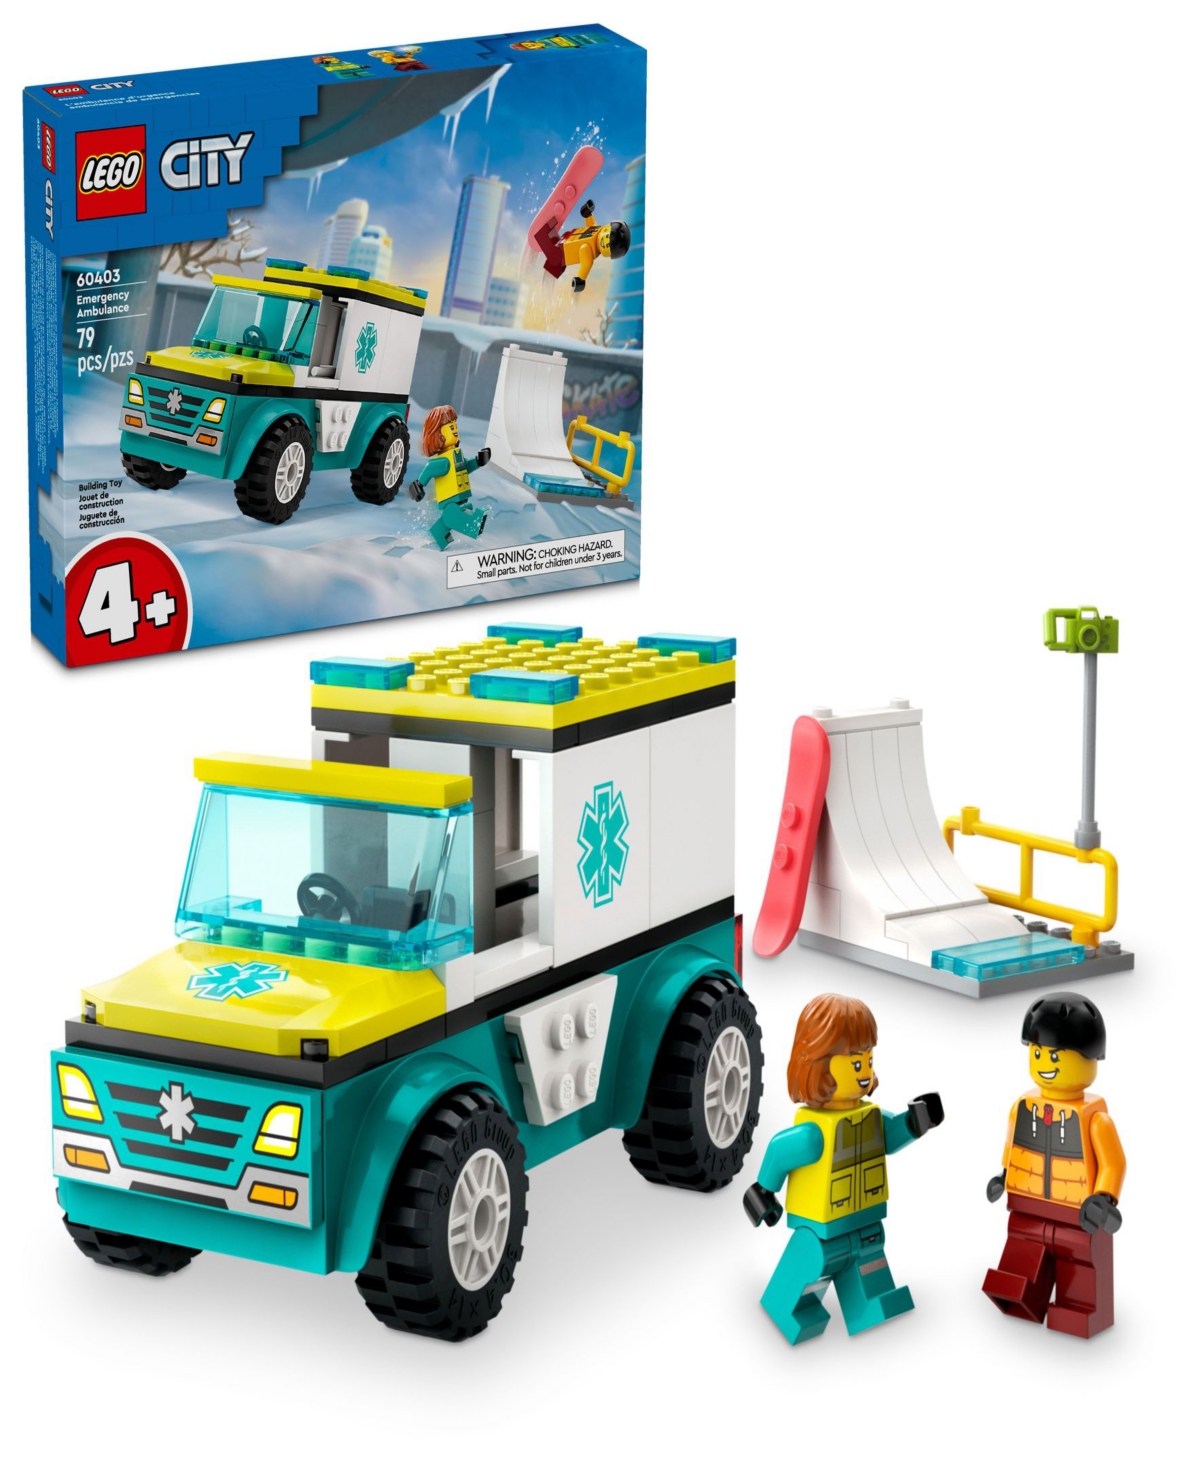 Shop Lego City Emergency Ambulance And Snowboarder 60403, 79 Pieces In Multicolor